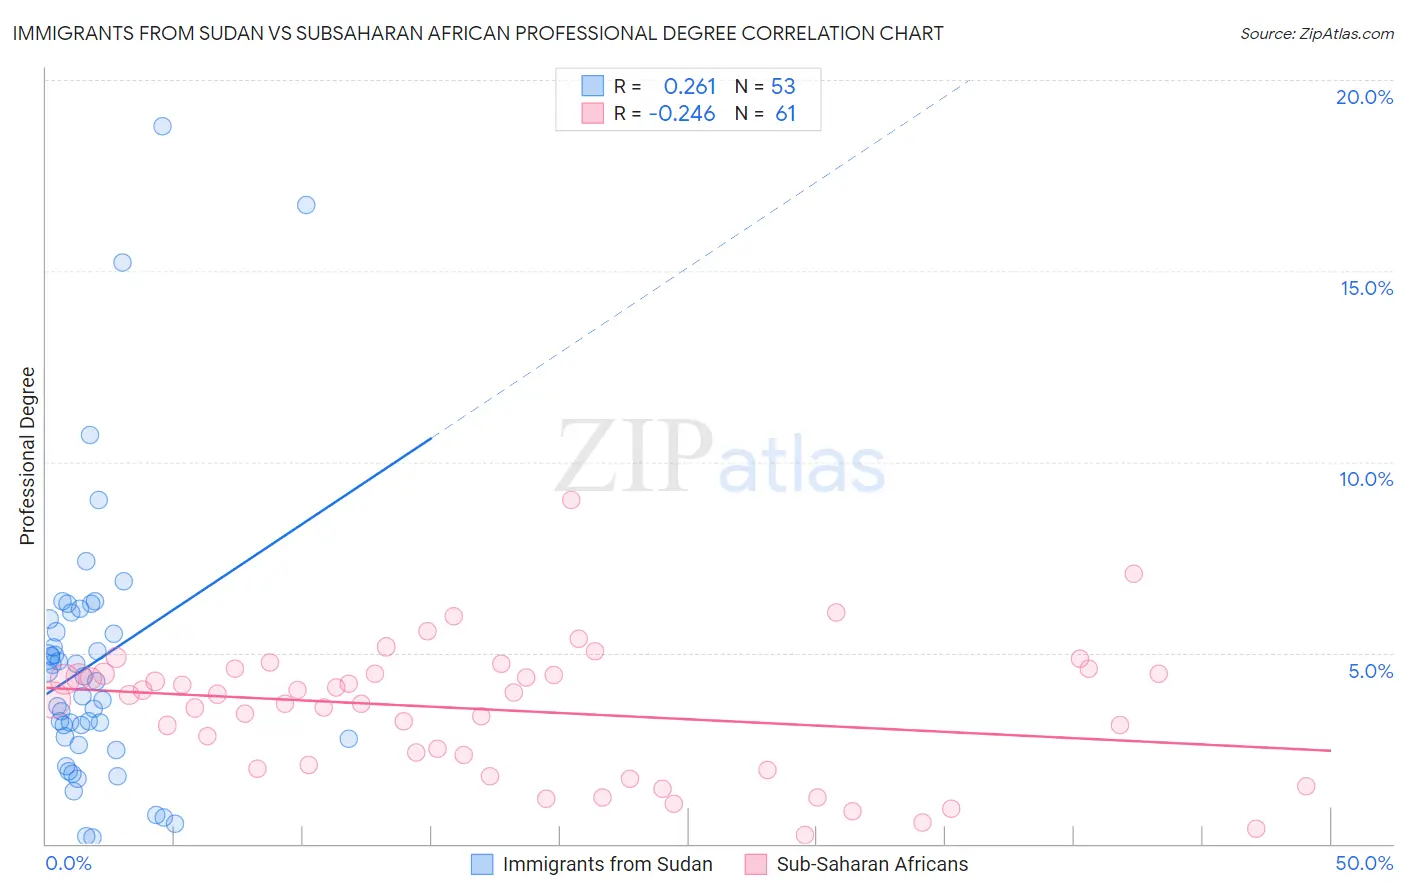 Immigrants from Sudan vs Subsaharan African Professional Degree